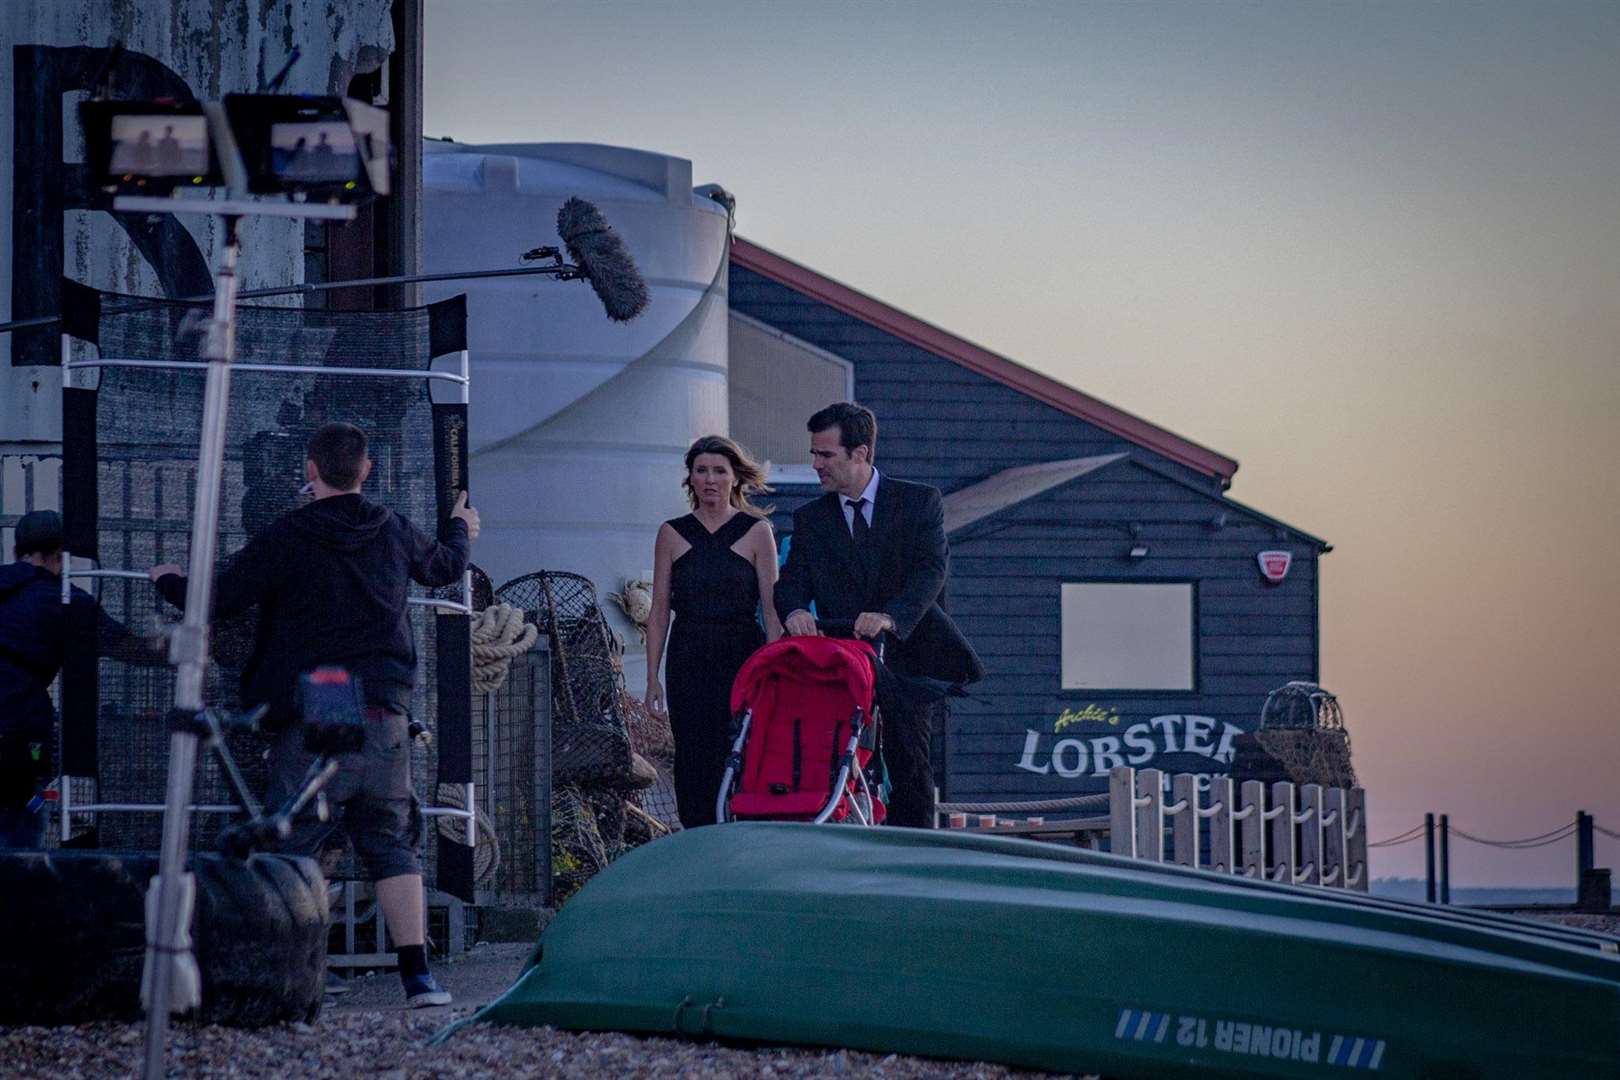 Sharon Horgan and Rob Delaney were spotted being filmed by The Lobster Shack. Picture: Phil Grosvenor